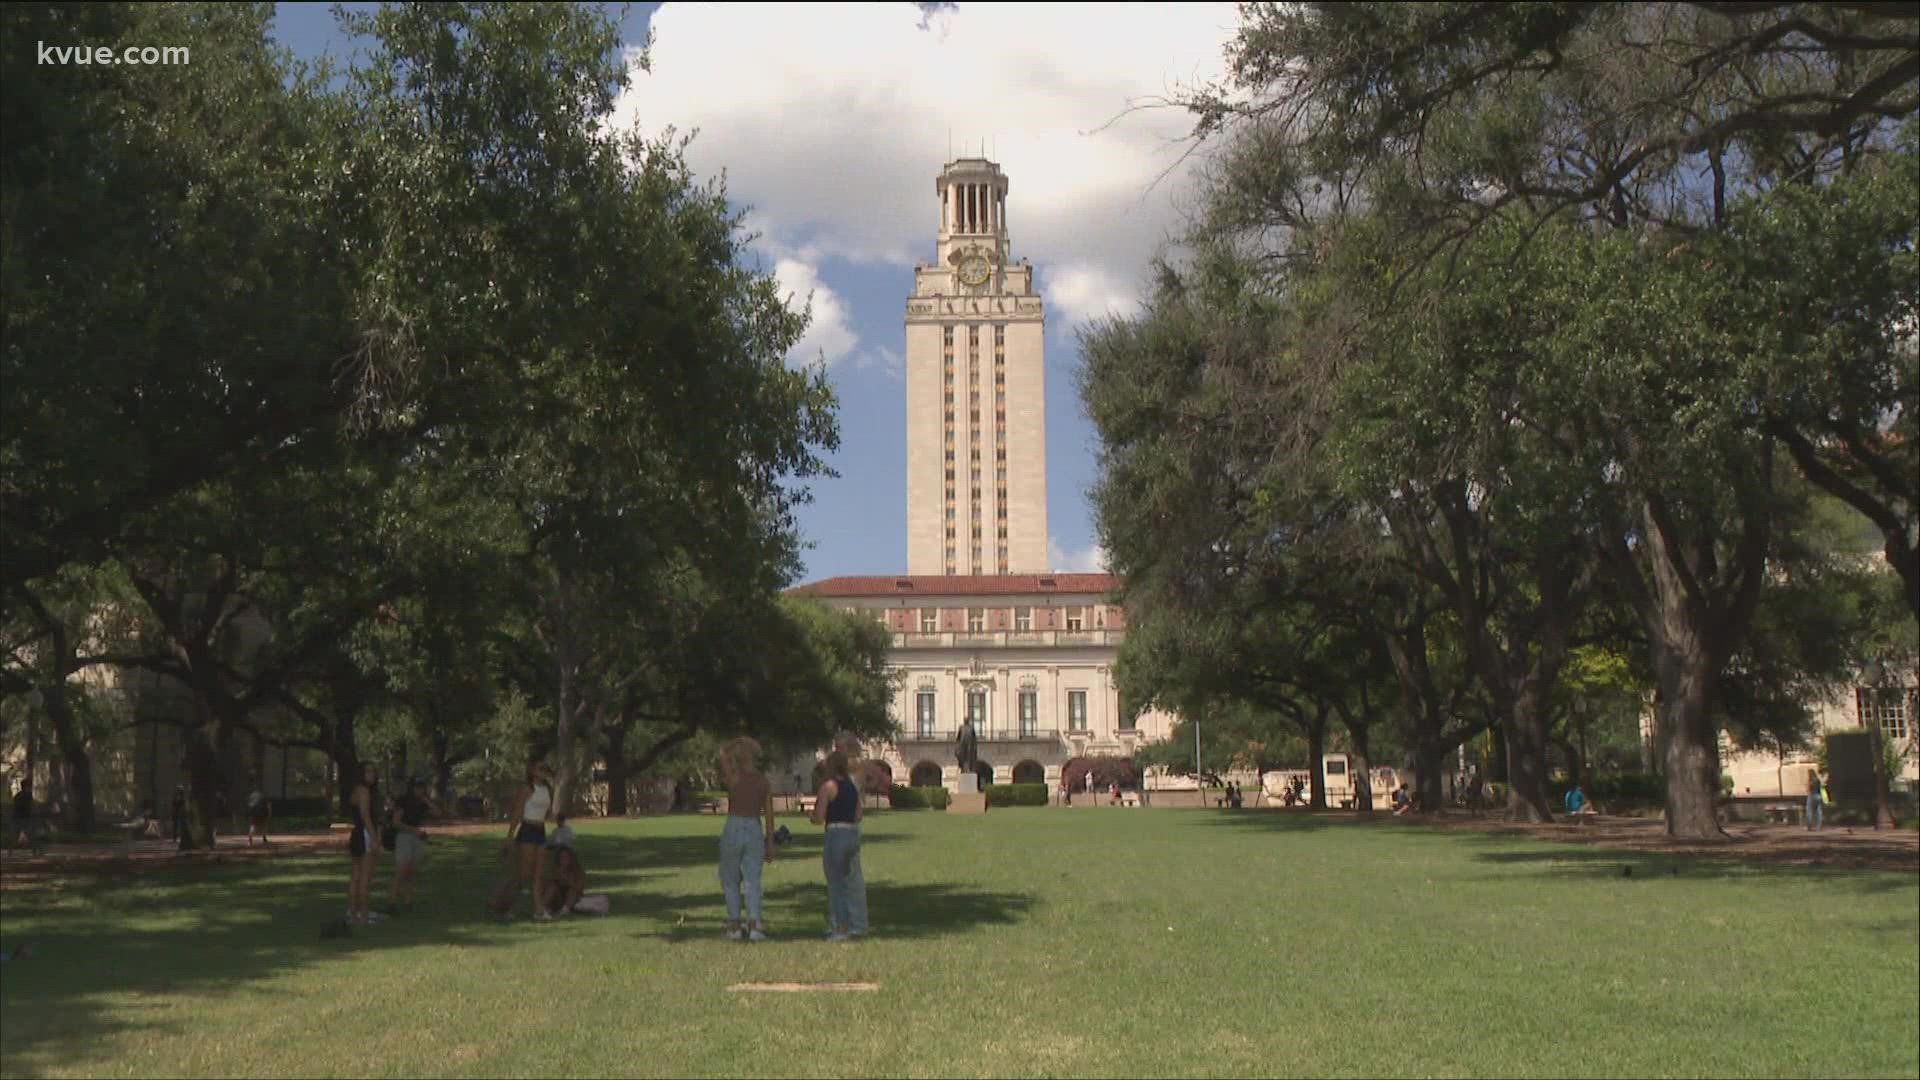 UT Austin is one of the top public schools in the nation, U.S. News